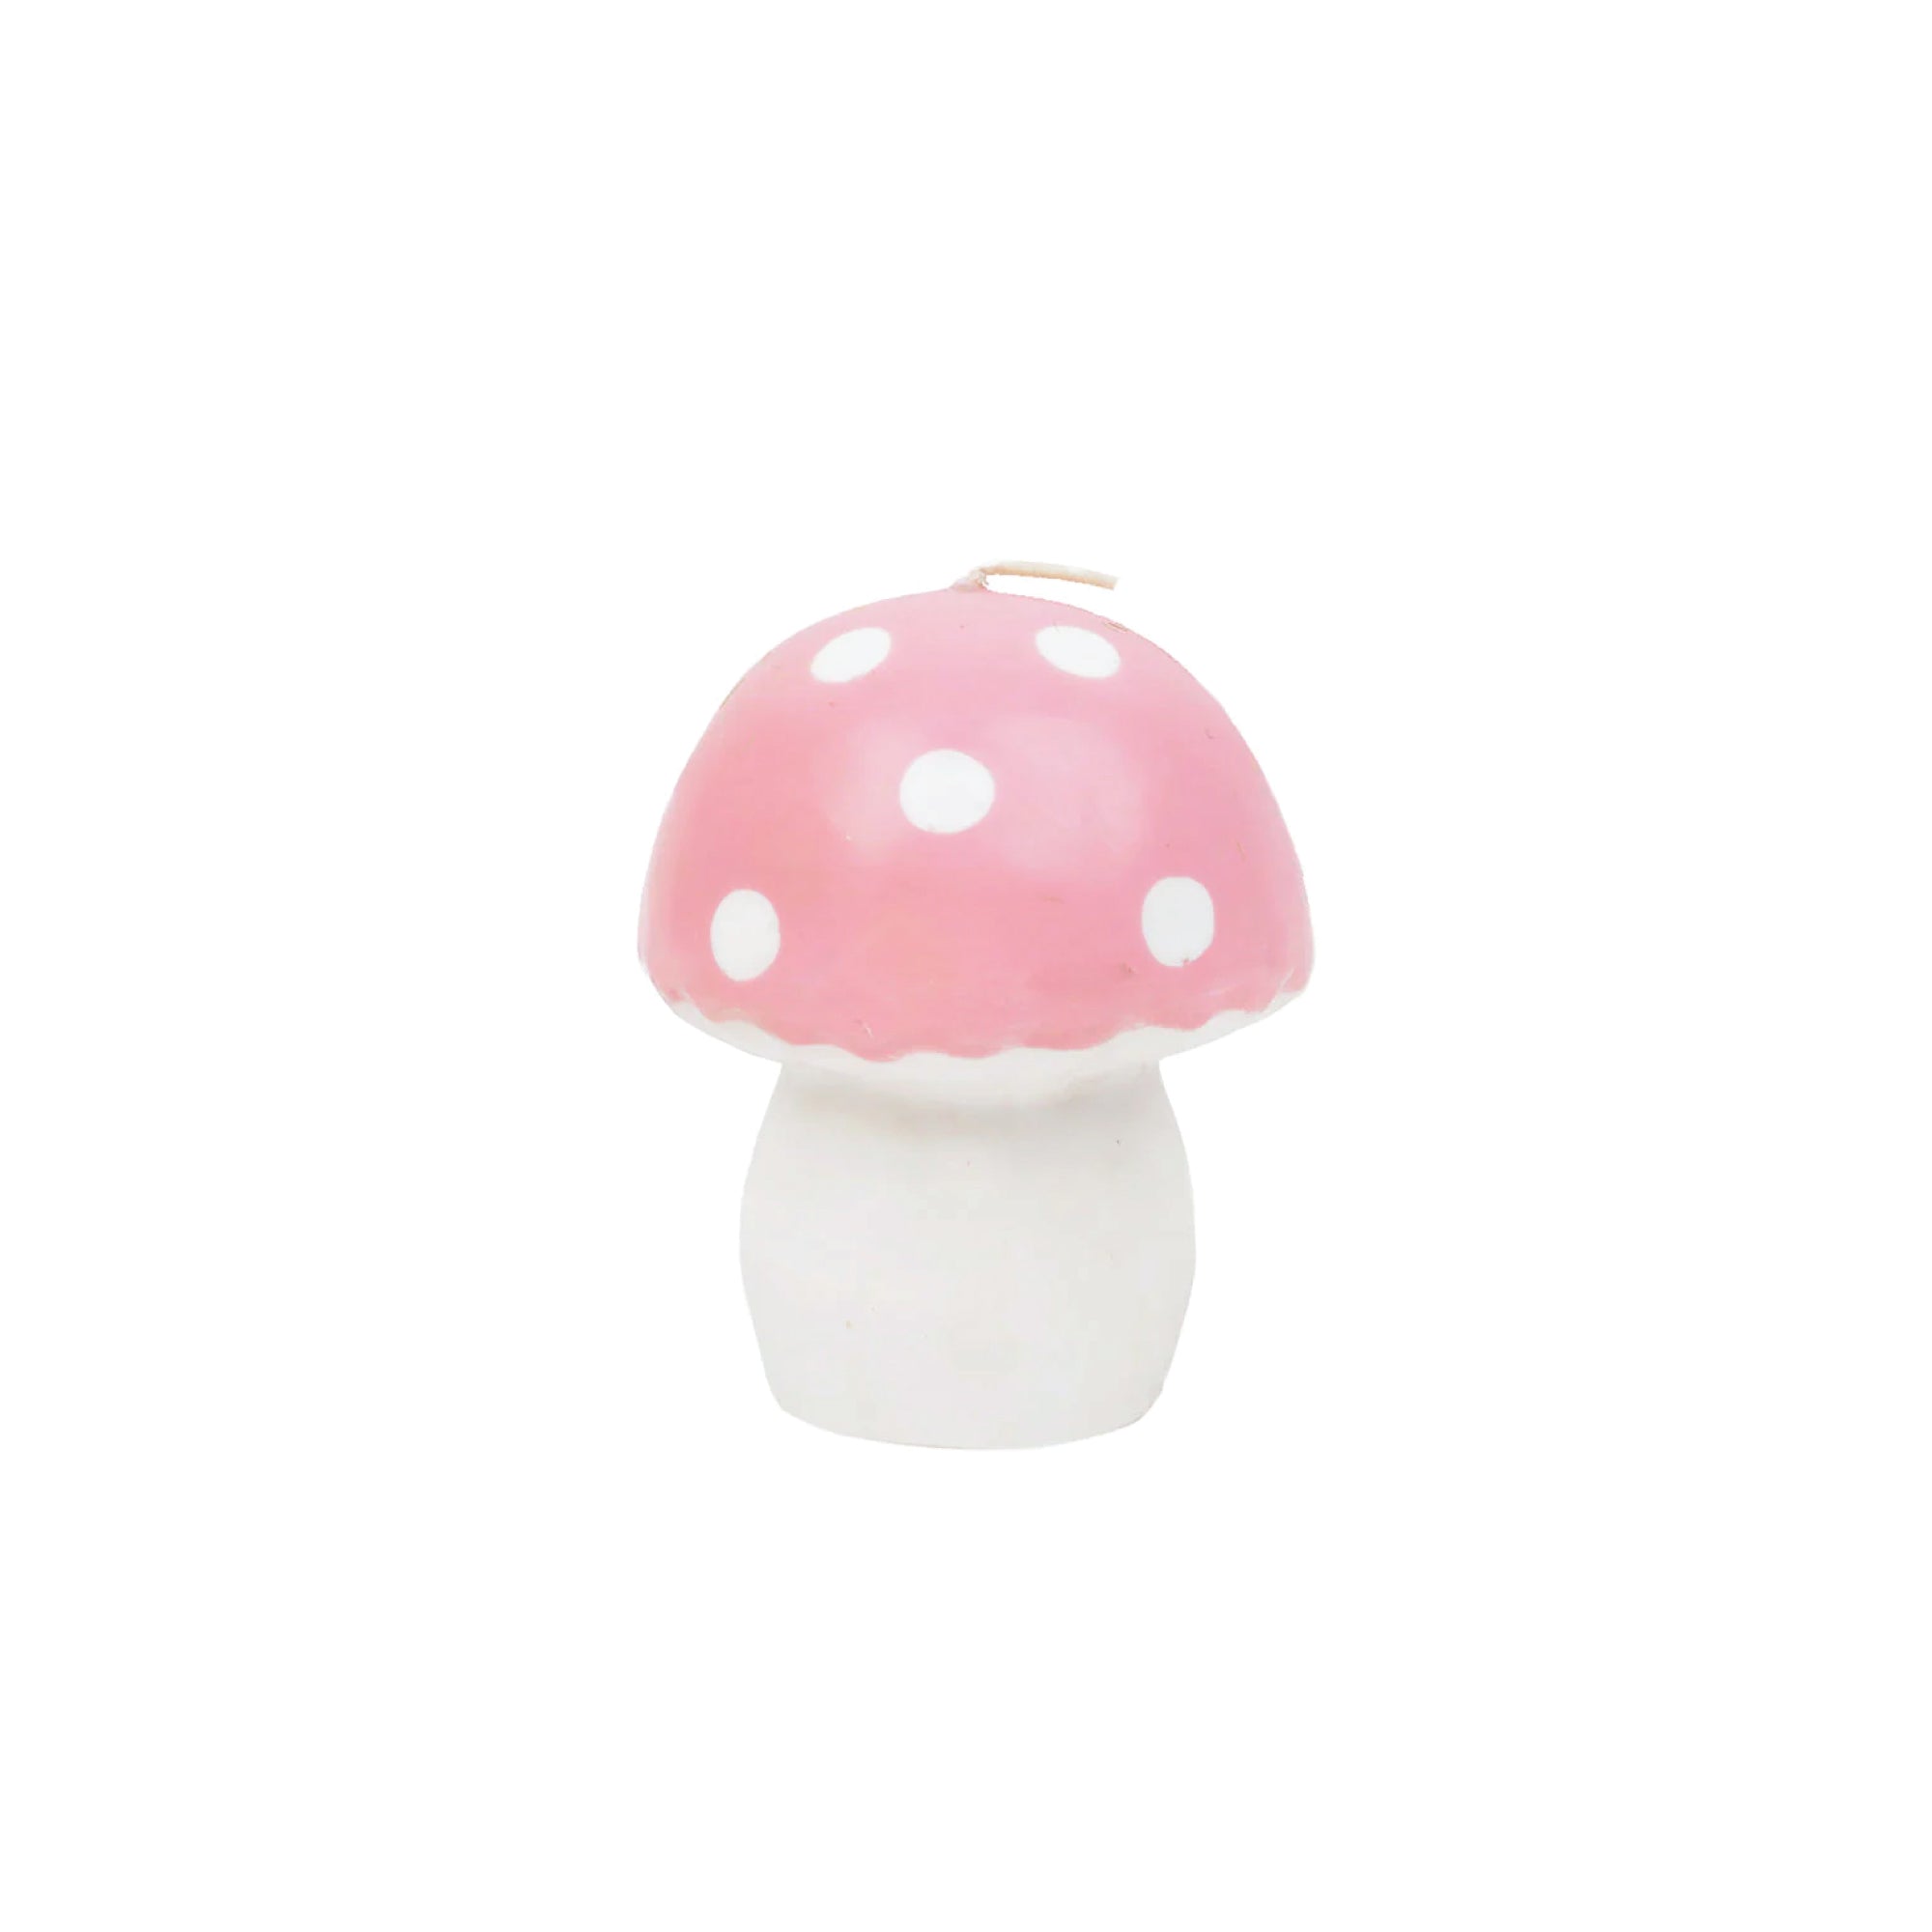 Large Pink Mushroom Candle 4in | The Party Darling